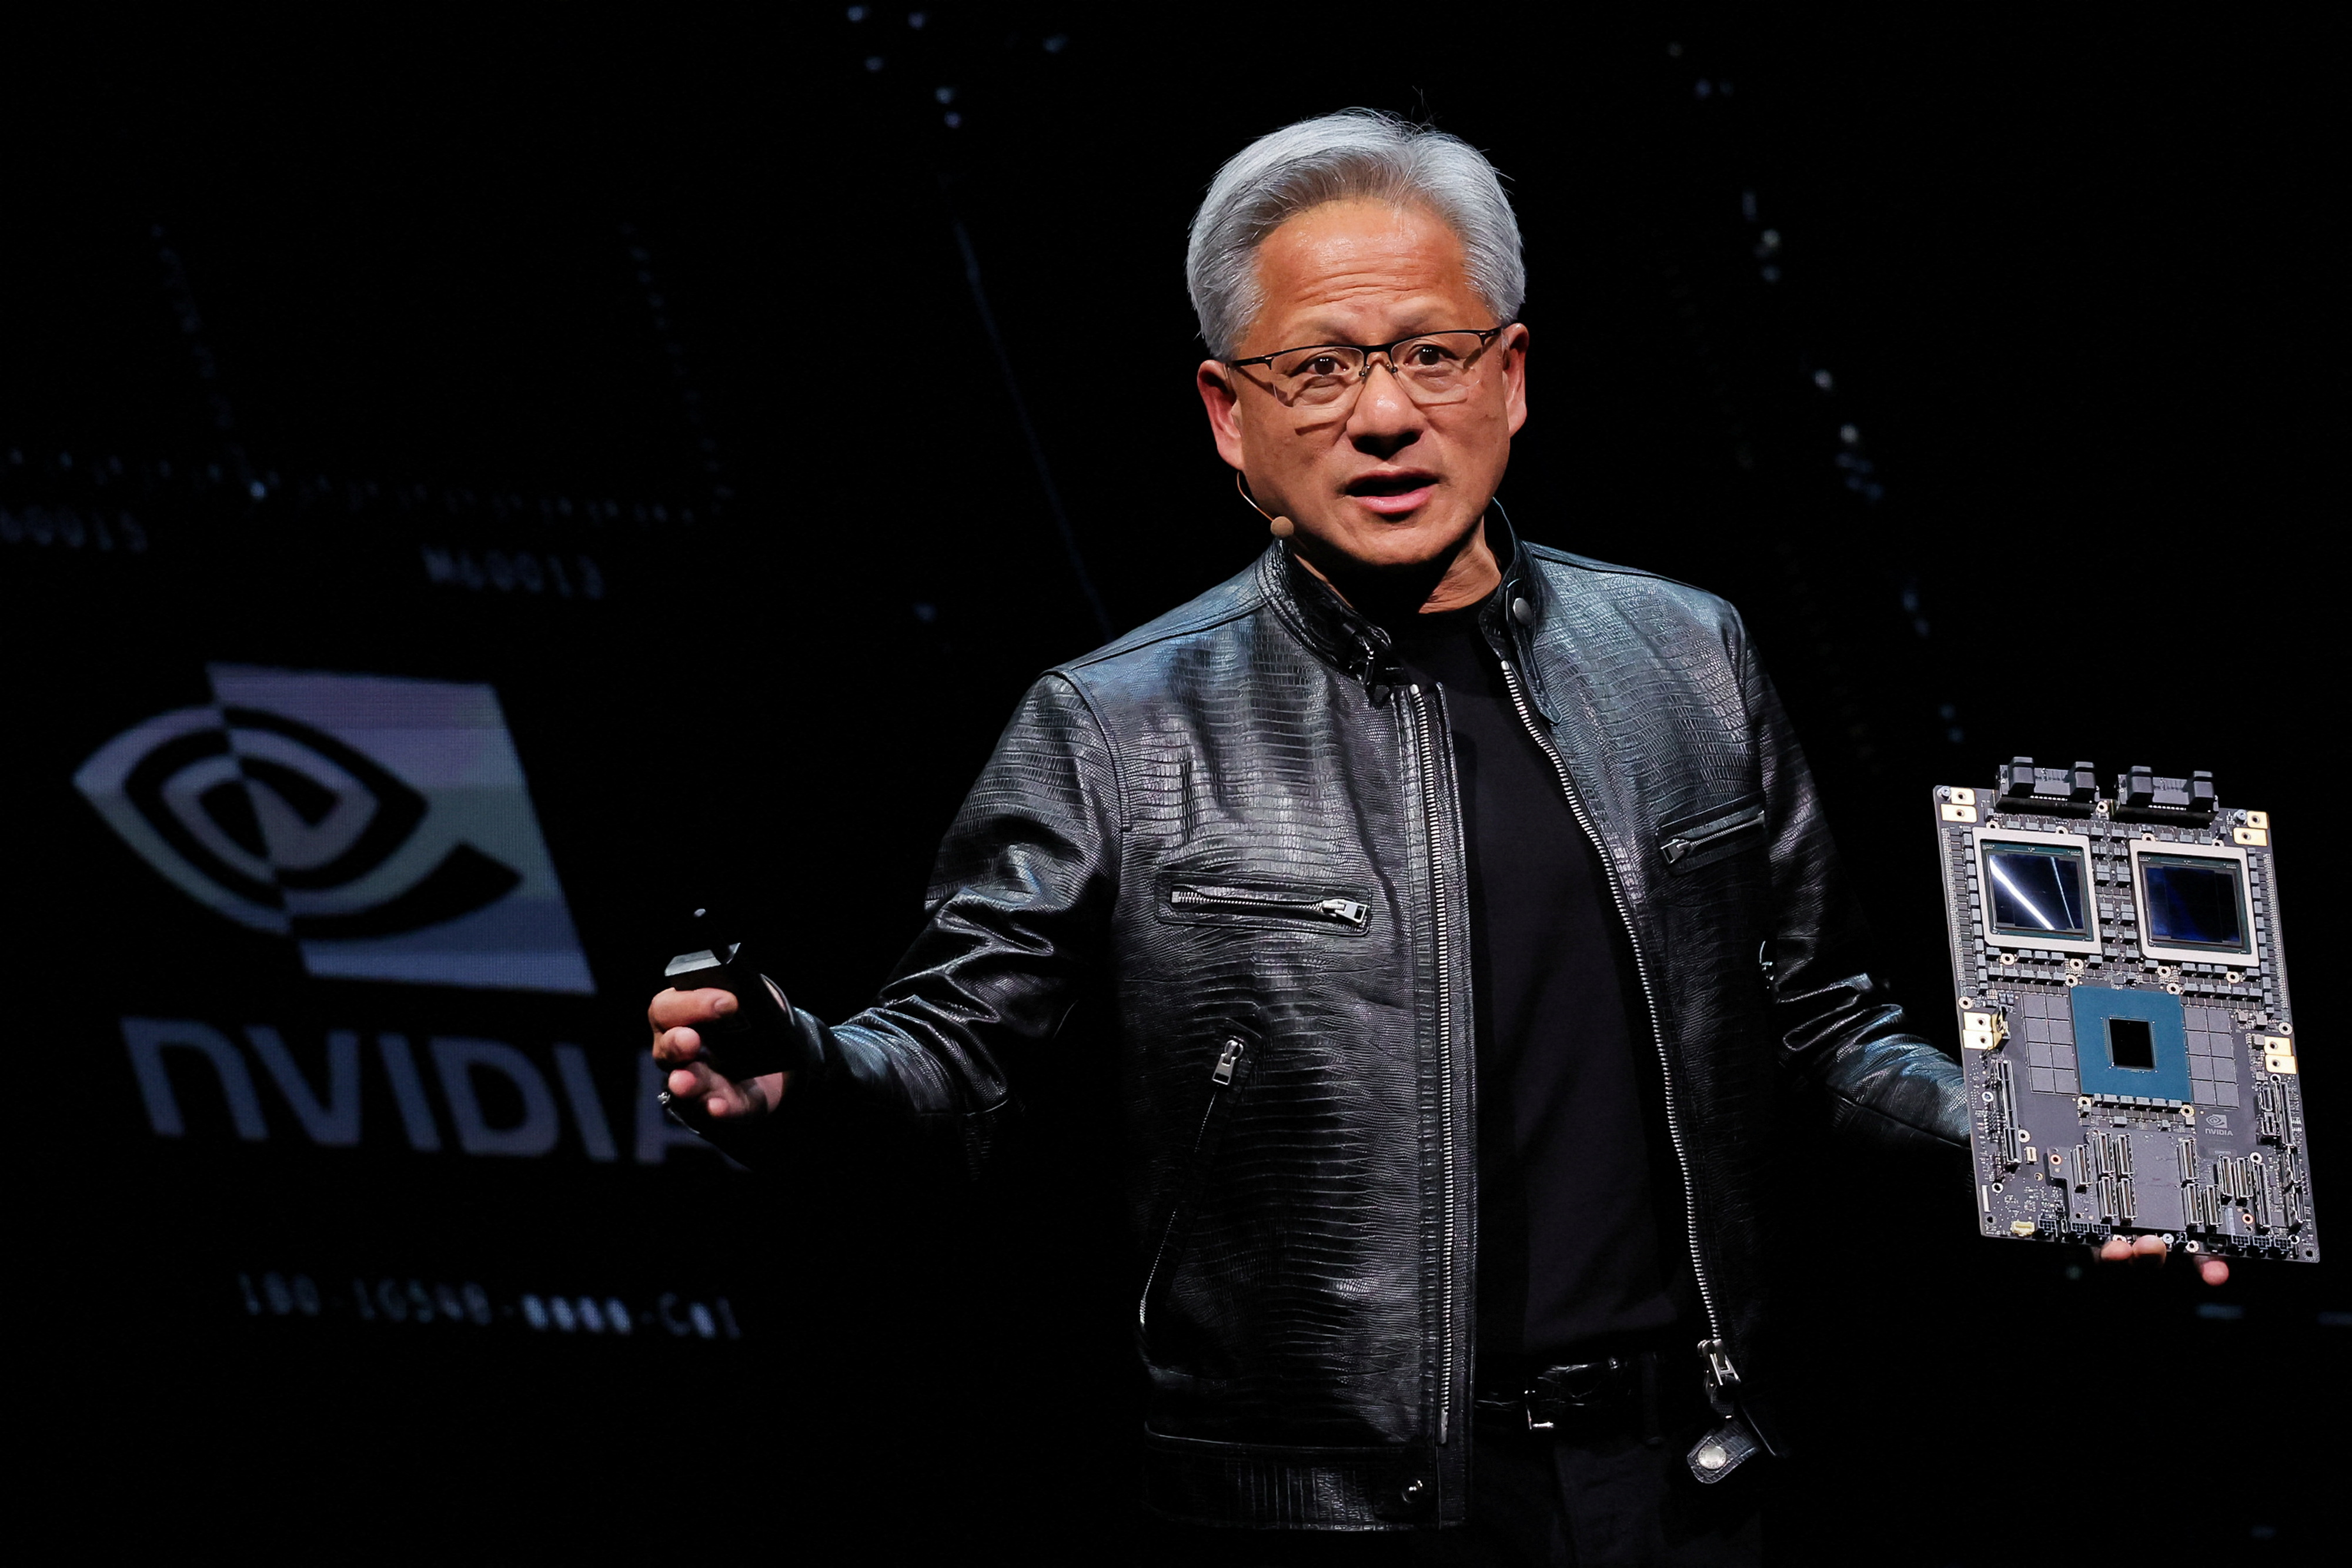 Nvidia CEO Jensen Huang present NVIDIA Blackwell platform at an event ahead of the COMPUTEX forum, in Taipei